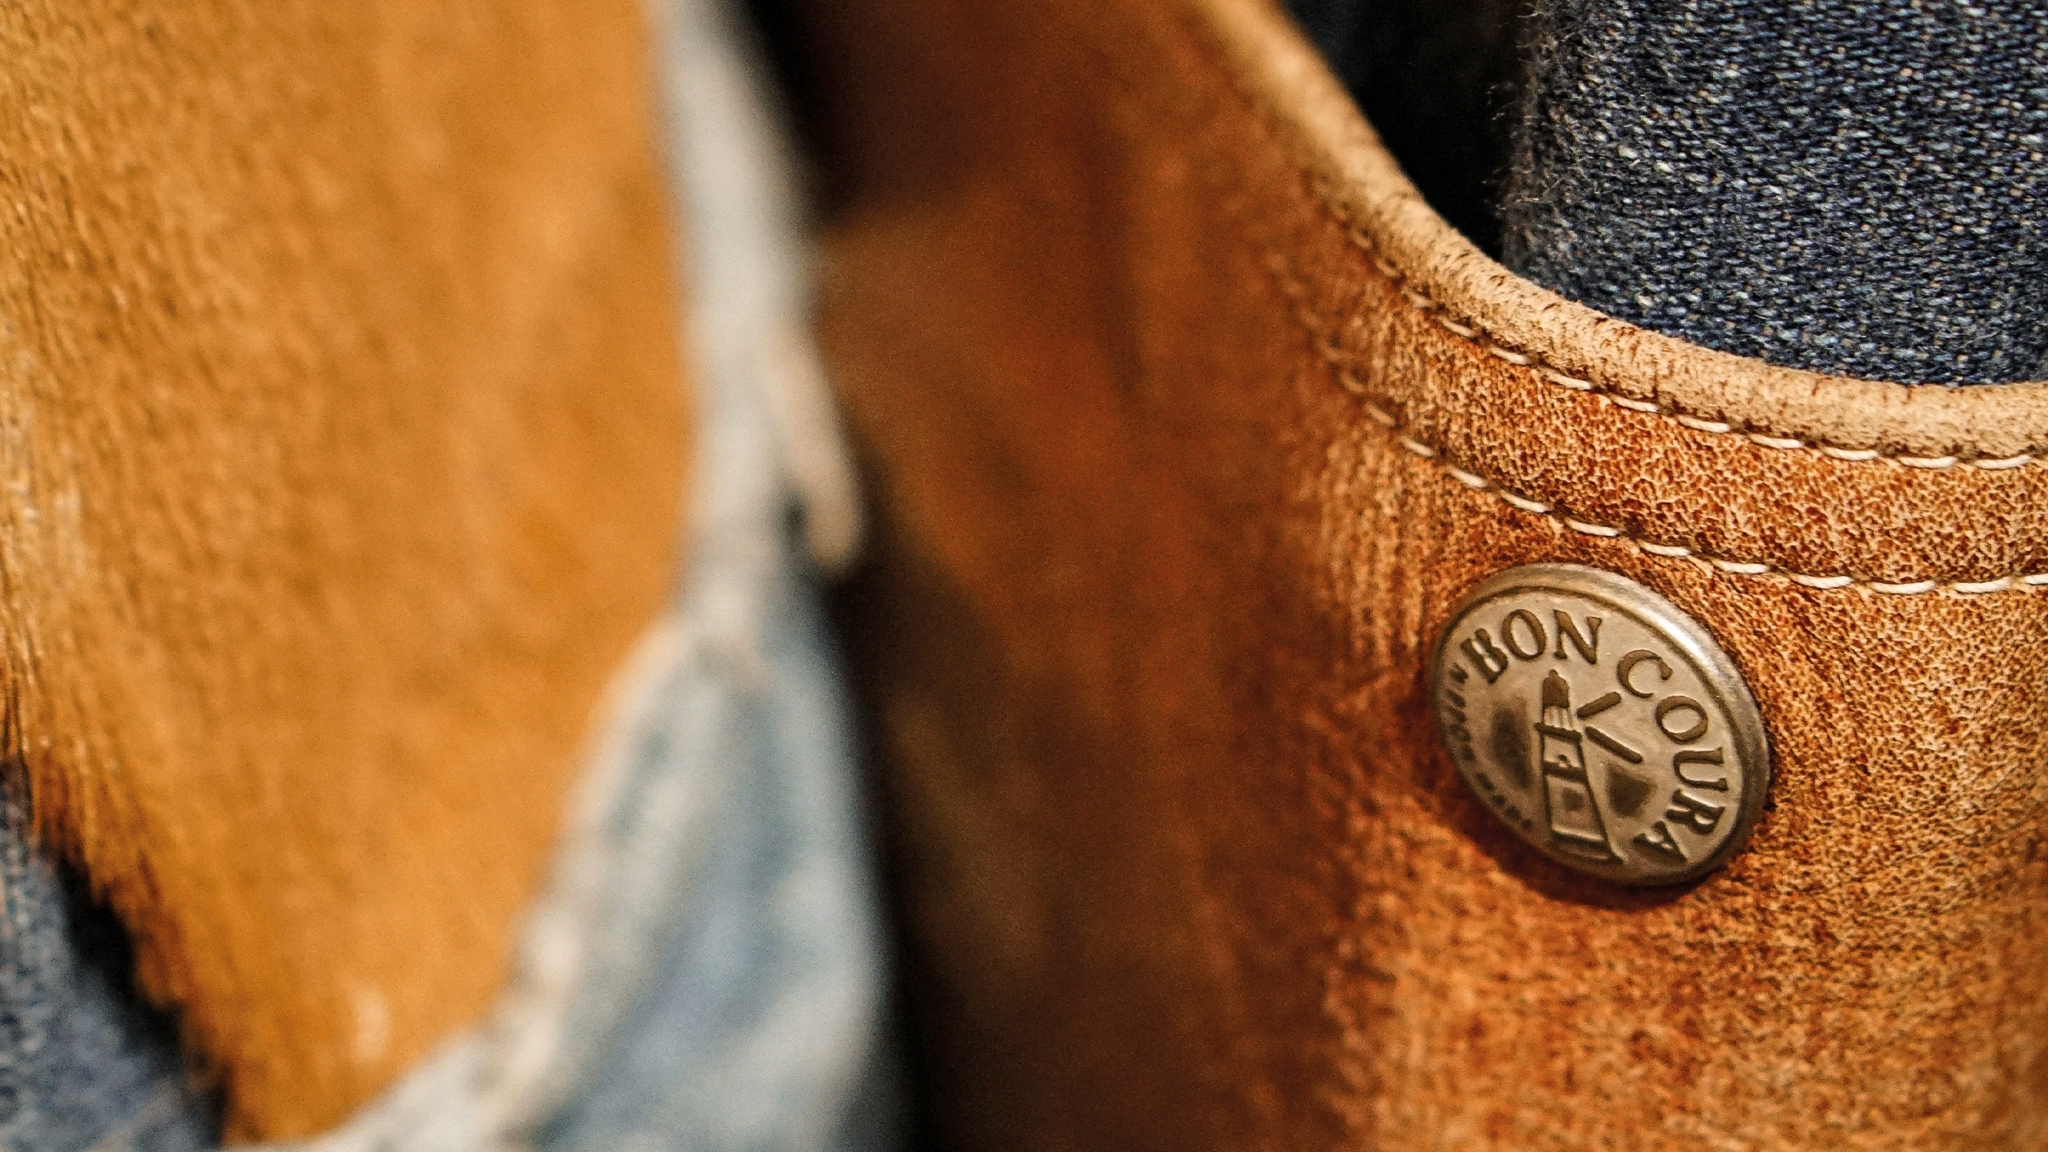 Bespoke BONCOURA button with the label's lighthouse logo, appears on a leather and denim item in Salon BONCOURA